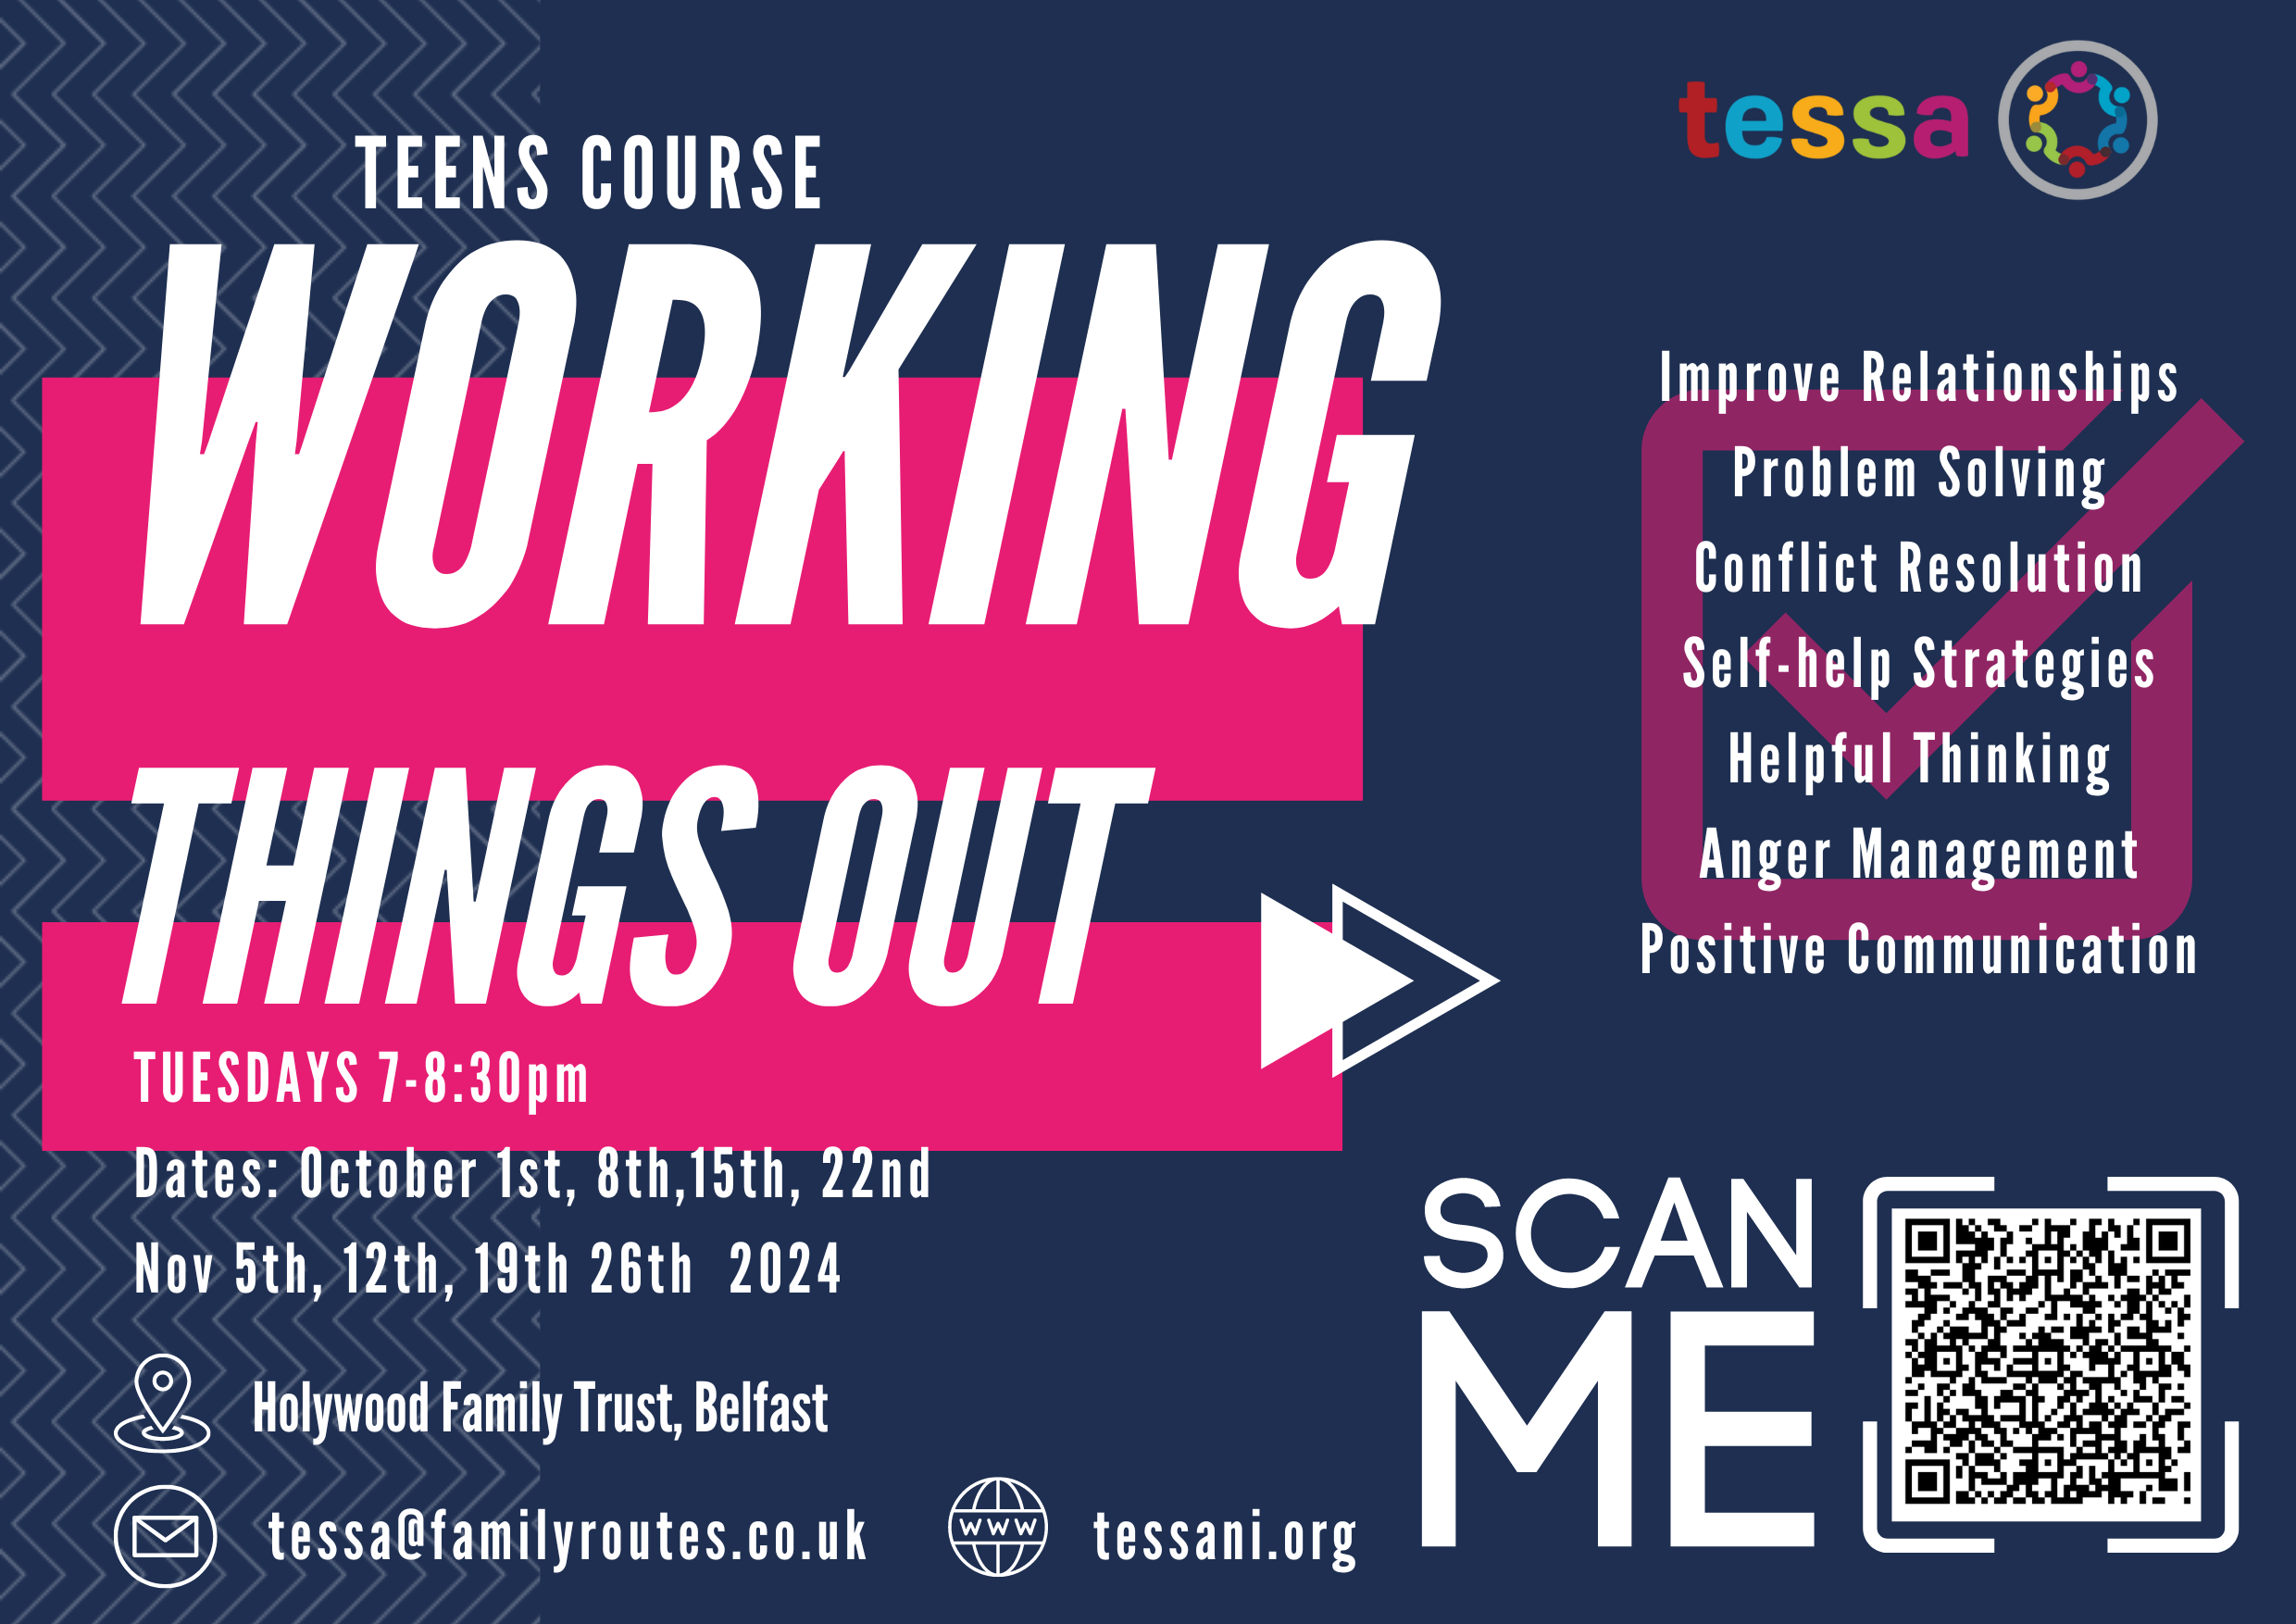 Working things out - teens